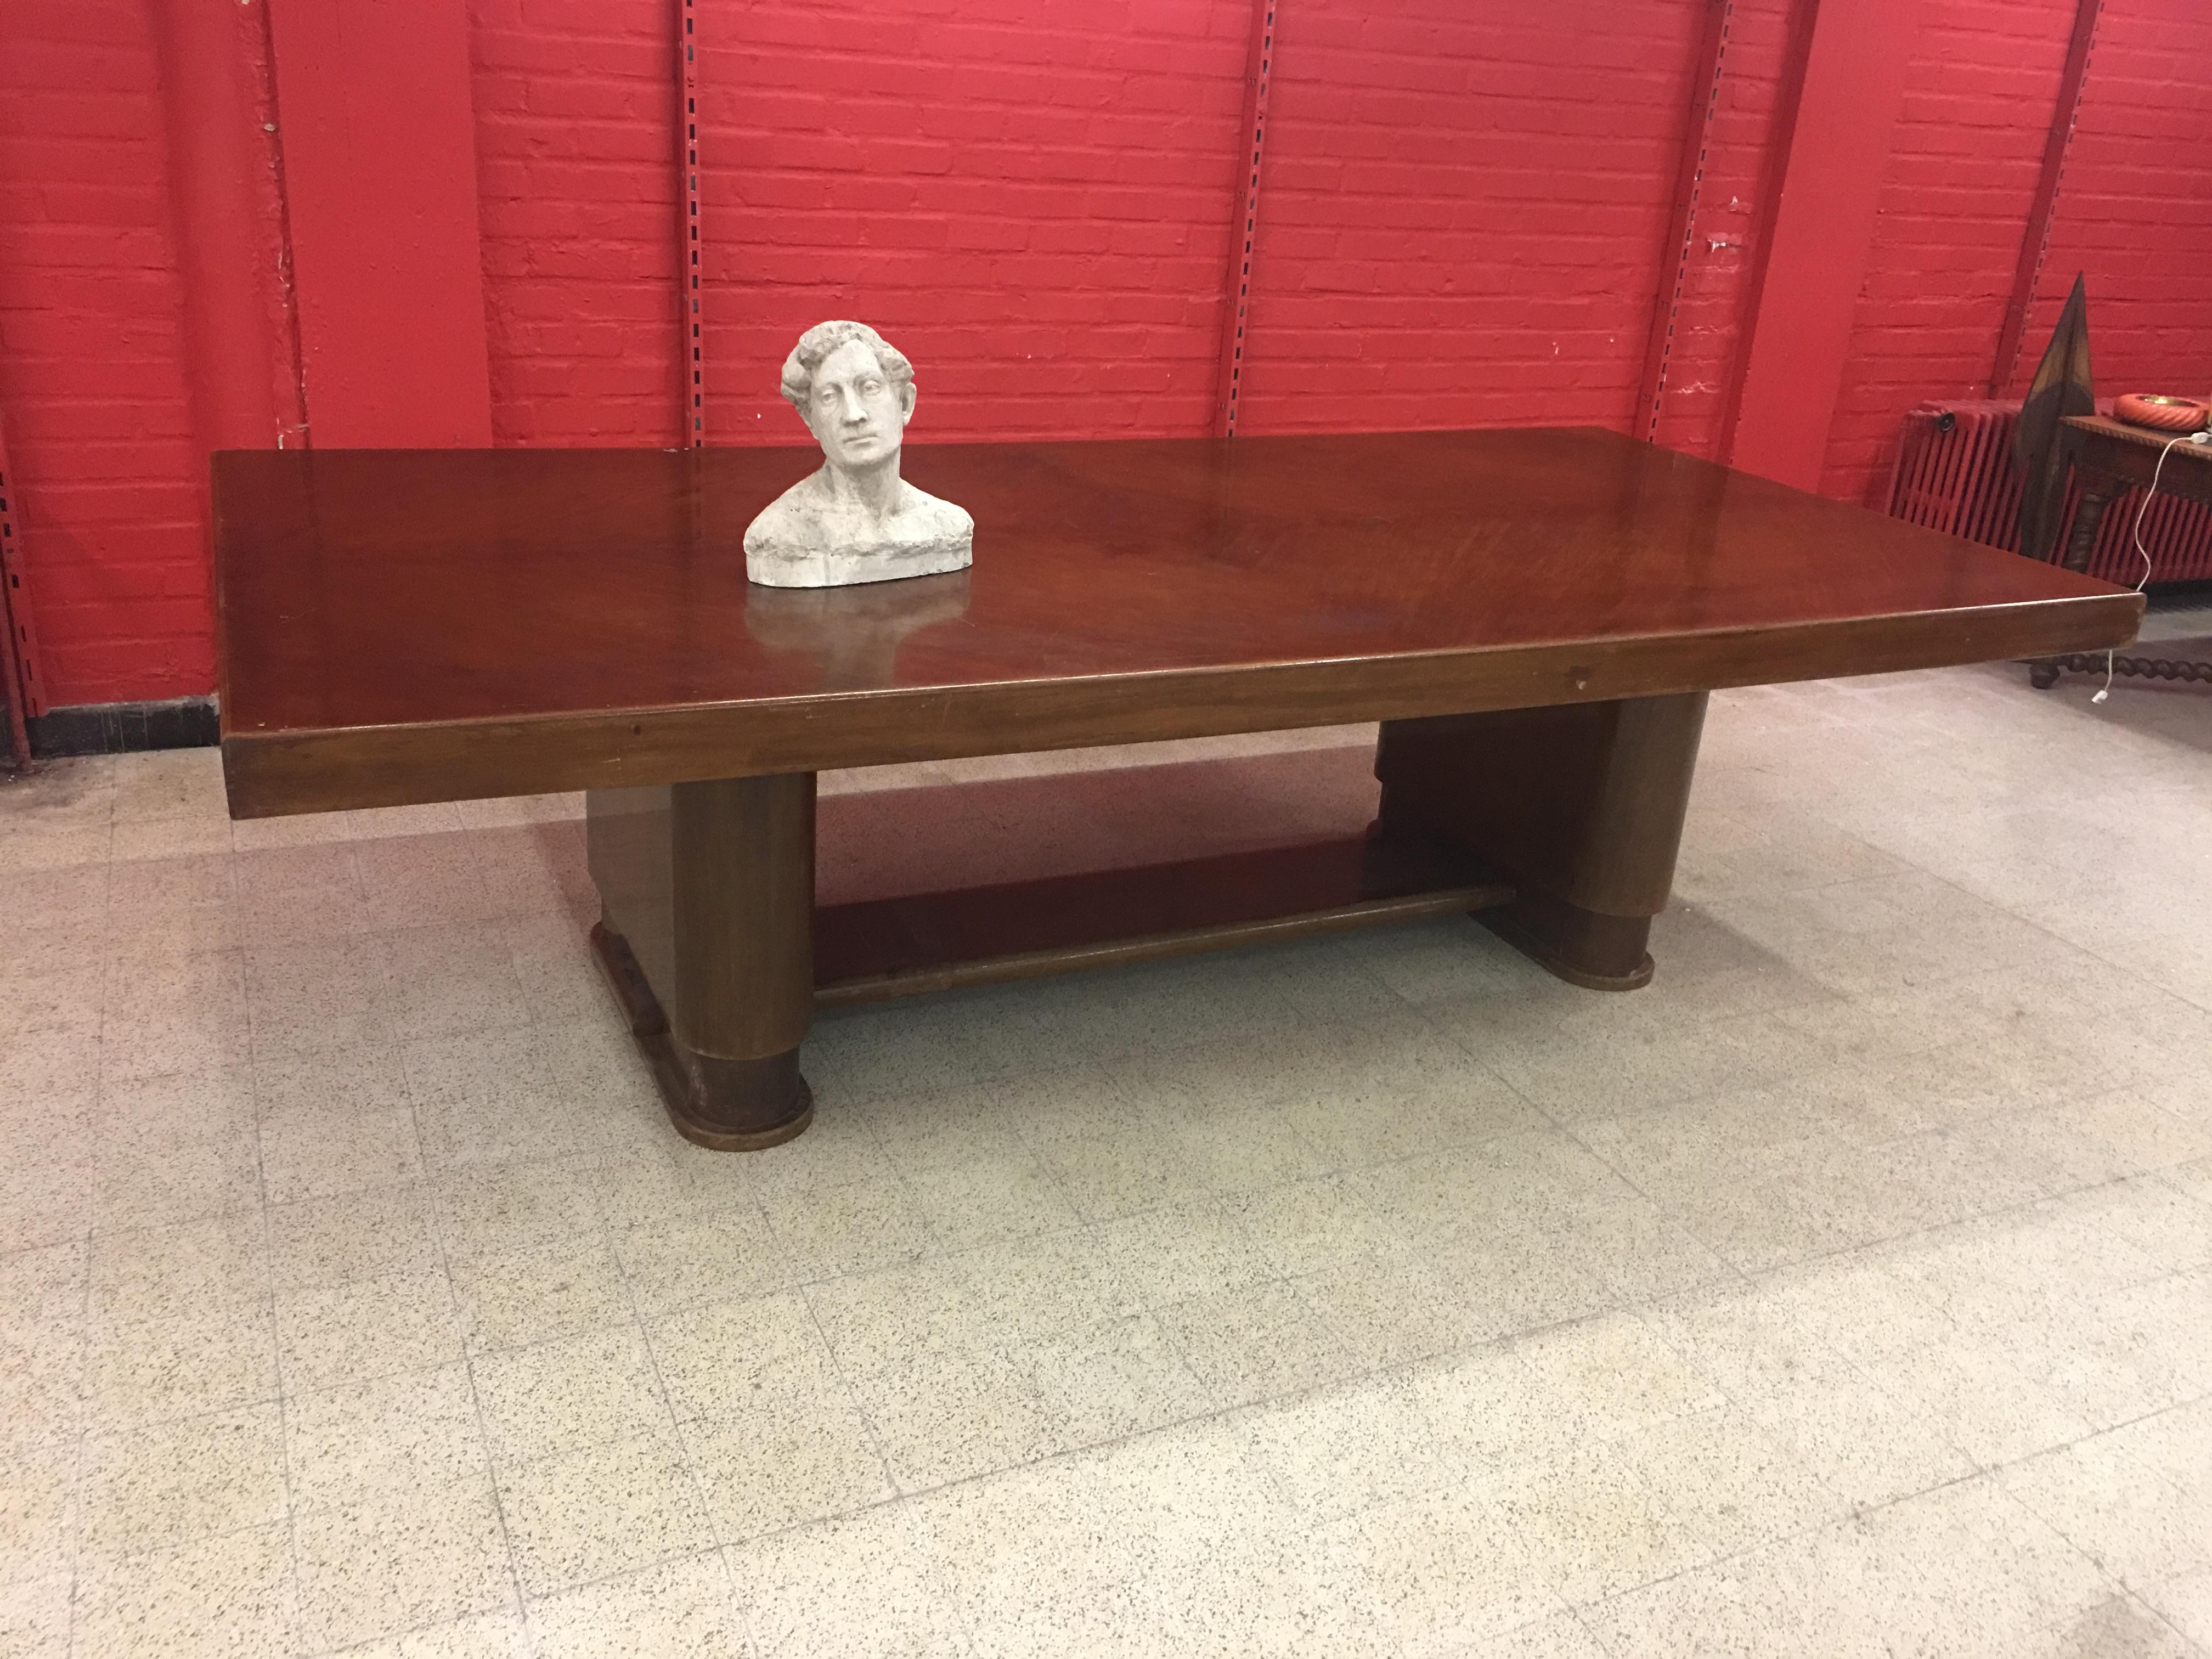 Large Art Deco table in mahogany and mahogany veneer, circa 1930
good general condition, but many wormholes on the top.